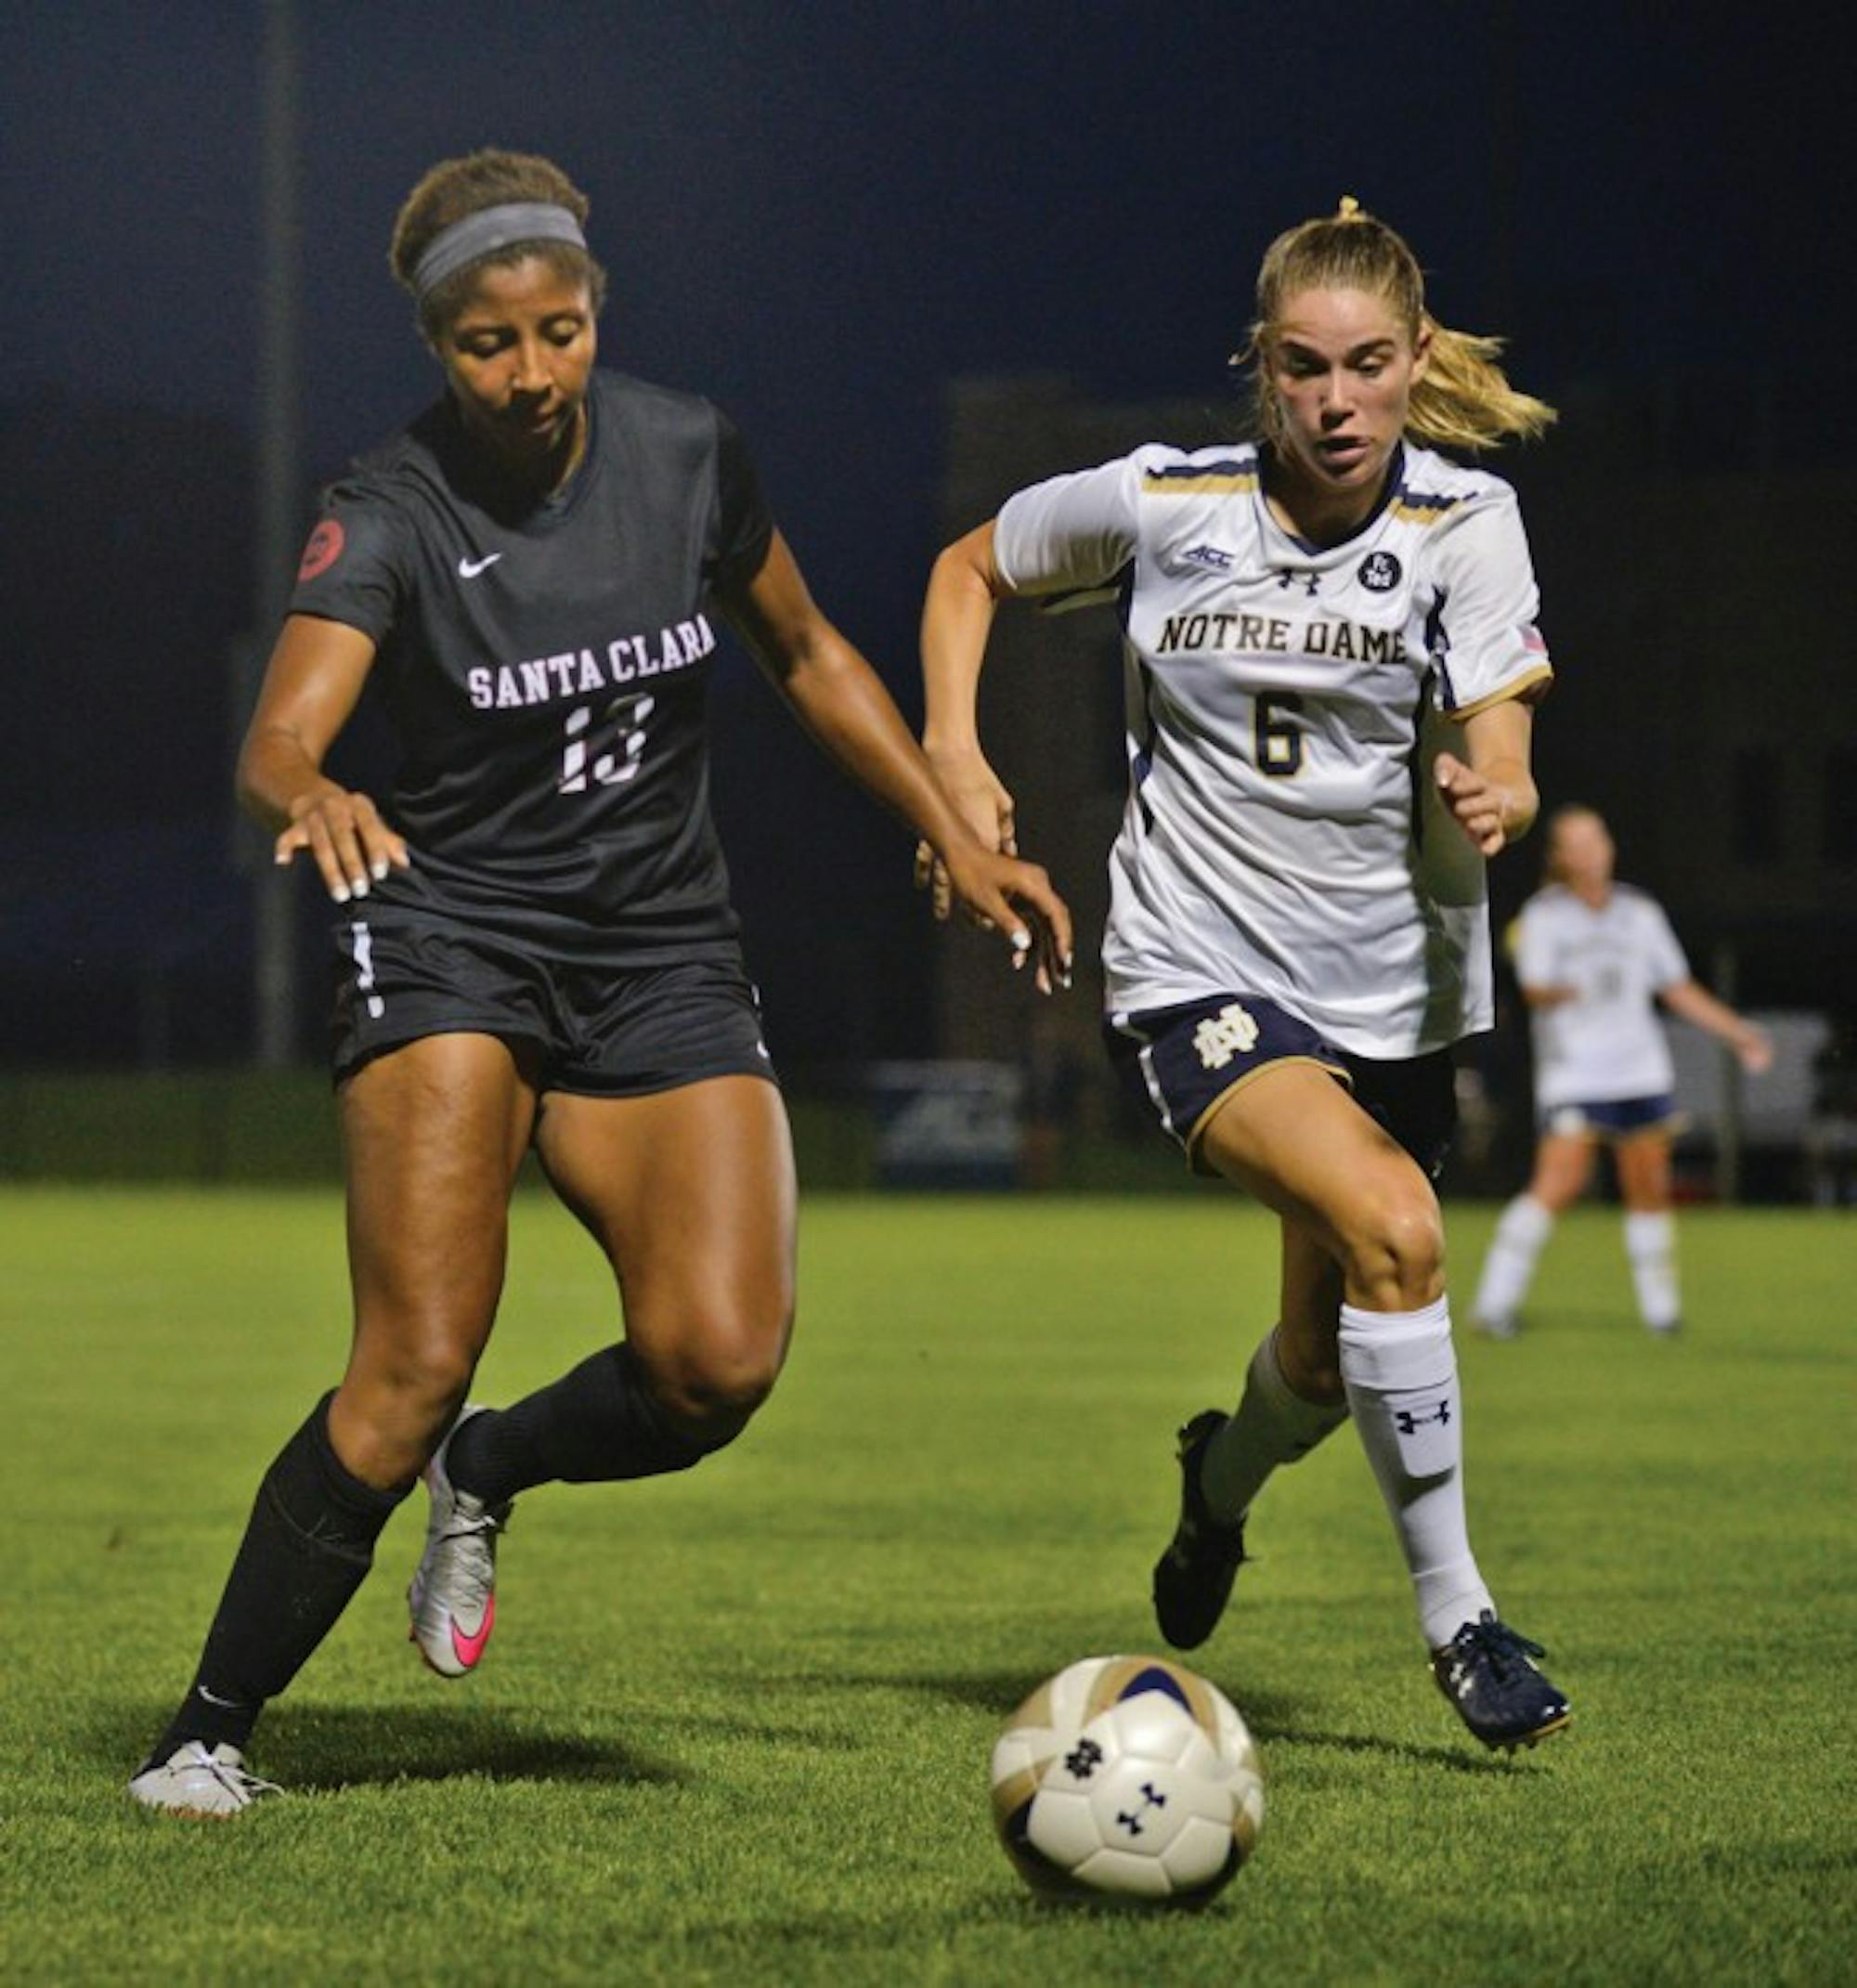 Senior forward Anna Maria Gilbertson fights for a loose ball in Notre  Dame’s 2-1 victory against Santa Clara on Aug. 28.